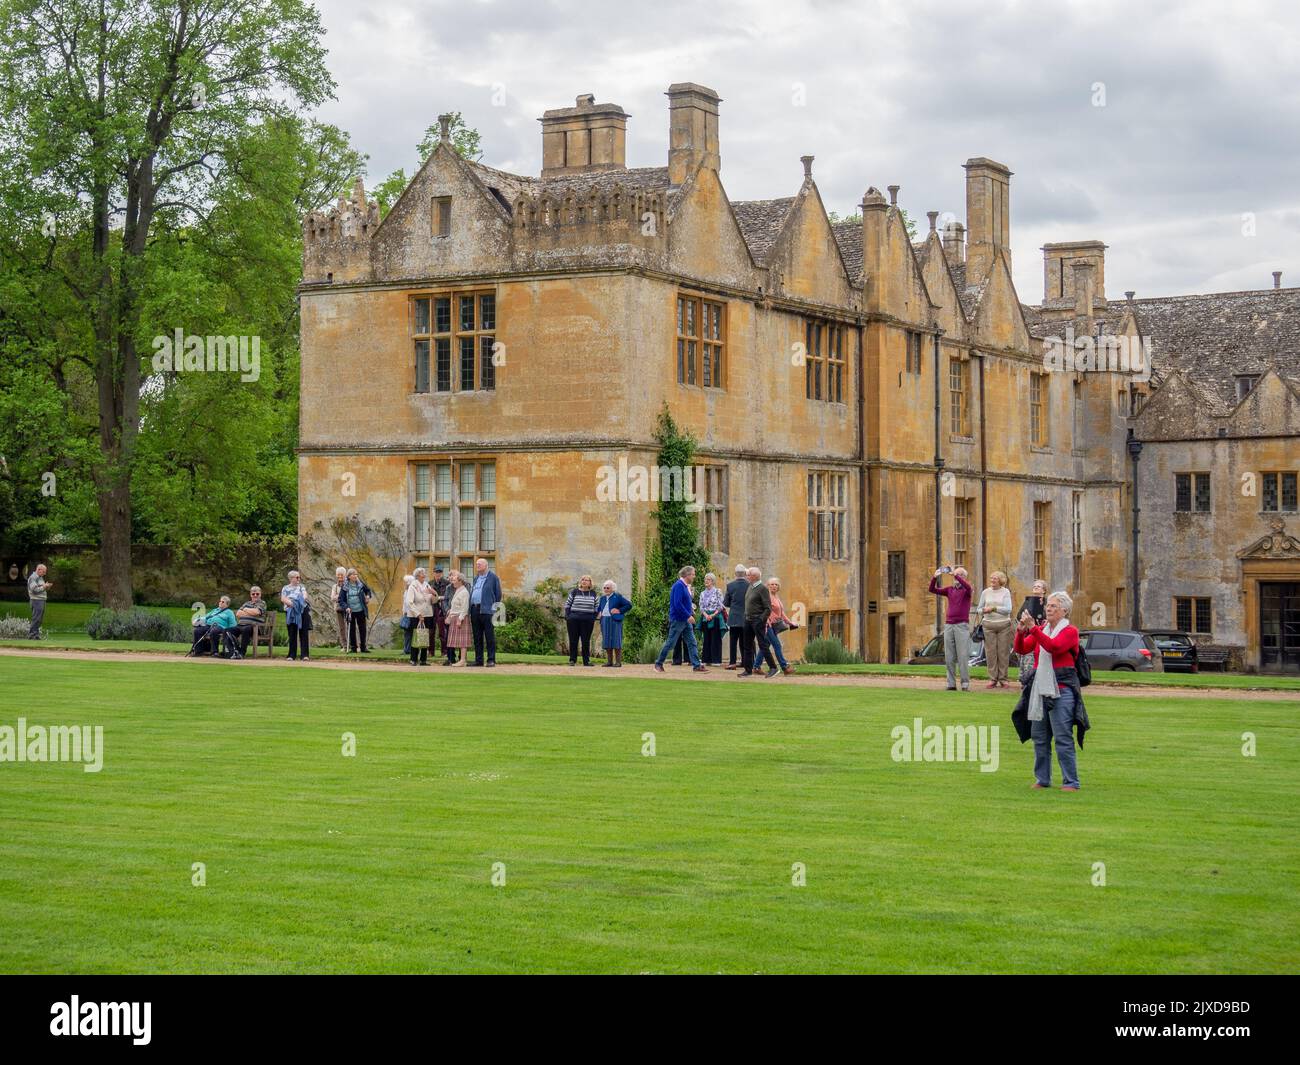 Exterior of Stanway House, a Jacobean manor house from the 16th century, Stanway, Cotswolds, Gloucestershire; with a party of senior visitors Stock Photo